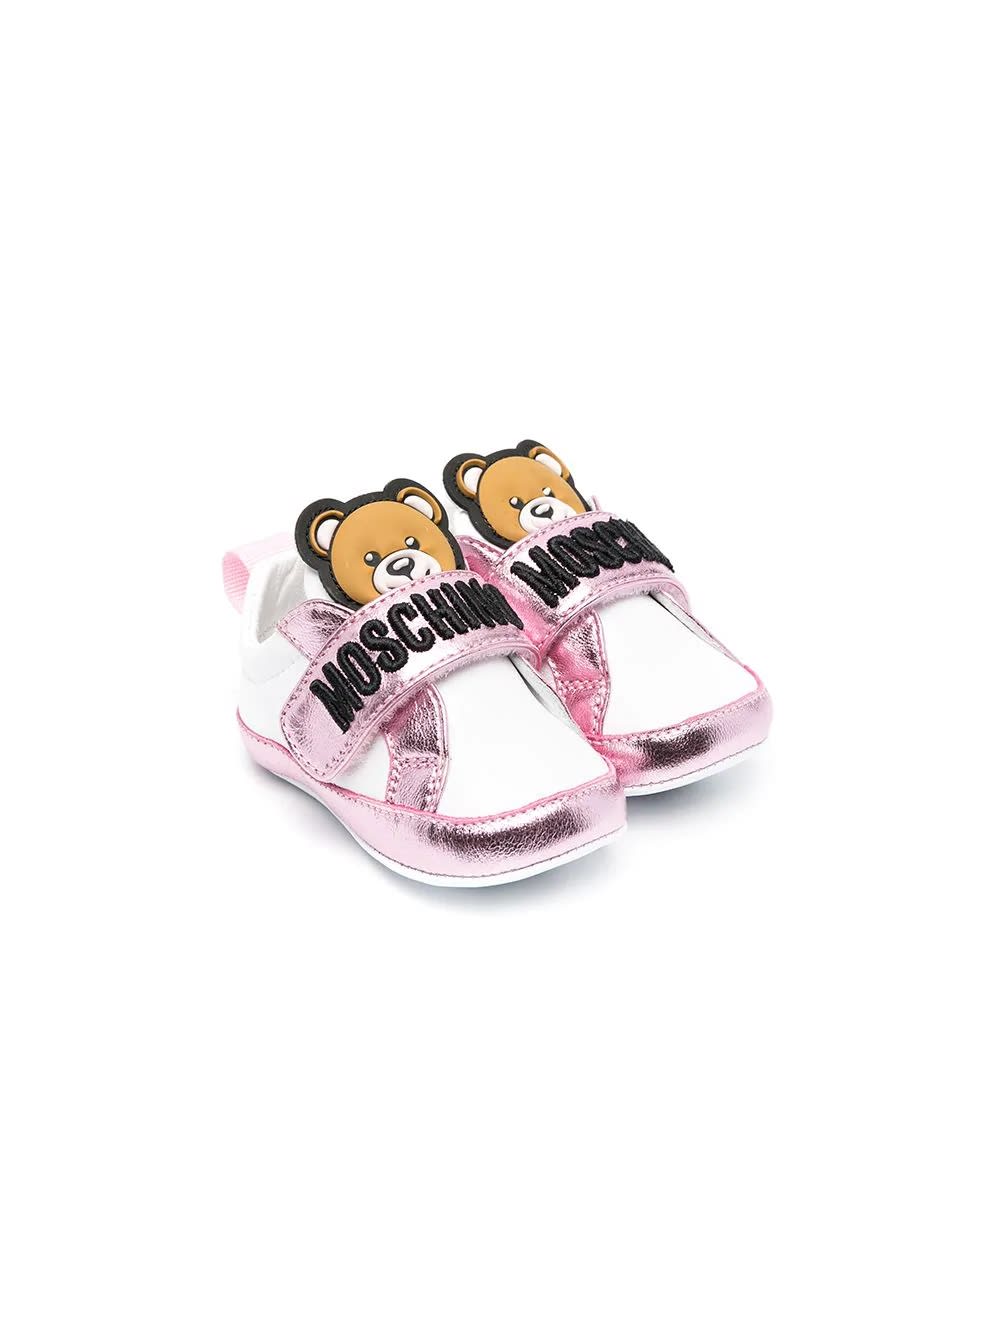 Moschino Cradle Shoes With Teddy Bear